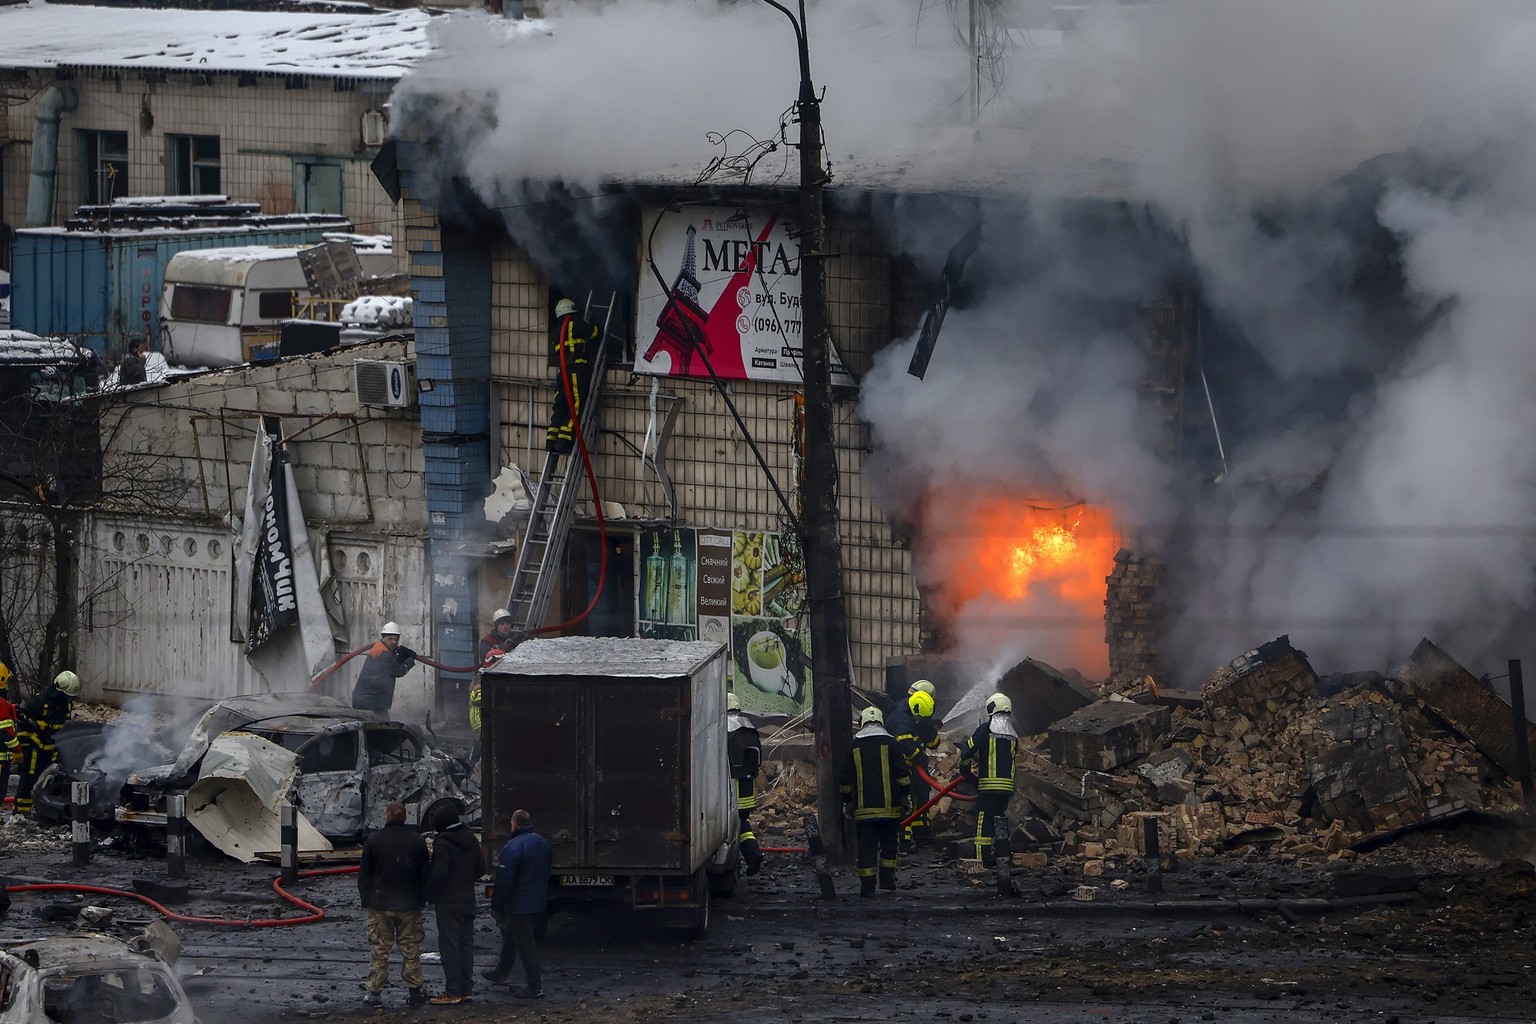 KYIV, UKRAINE - NOVEMBER 23: Fire and rescue workers attend a building hit by a missile in central Kyiv on November 23, 2022 in Kyiv, Ukraine. The city&#039;s Mayor Vitaly Klitschko confirmed on Teleg ...